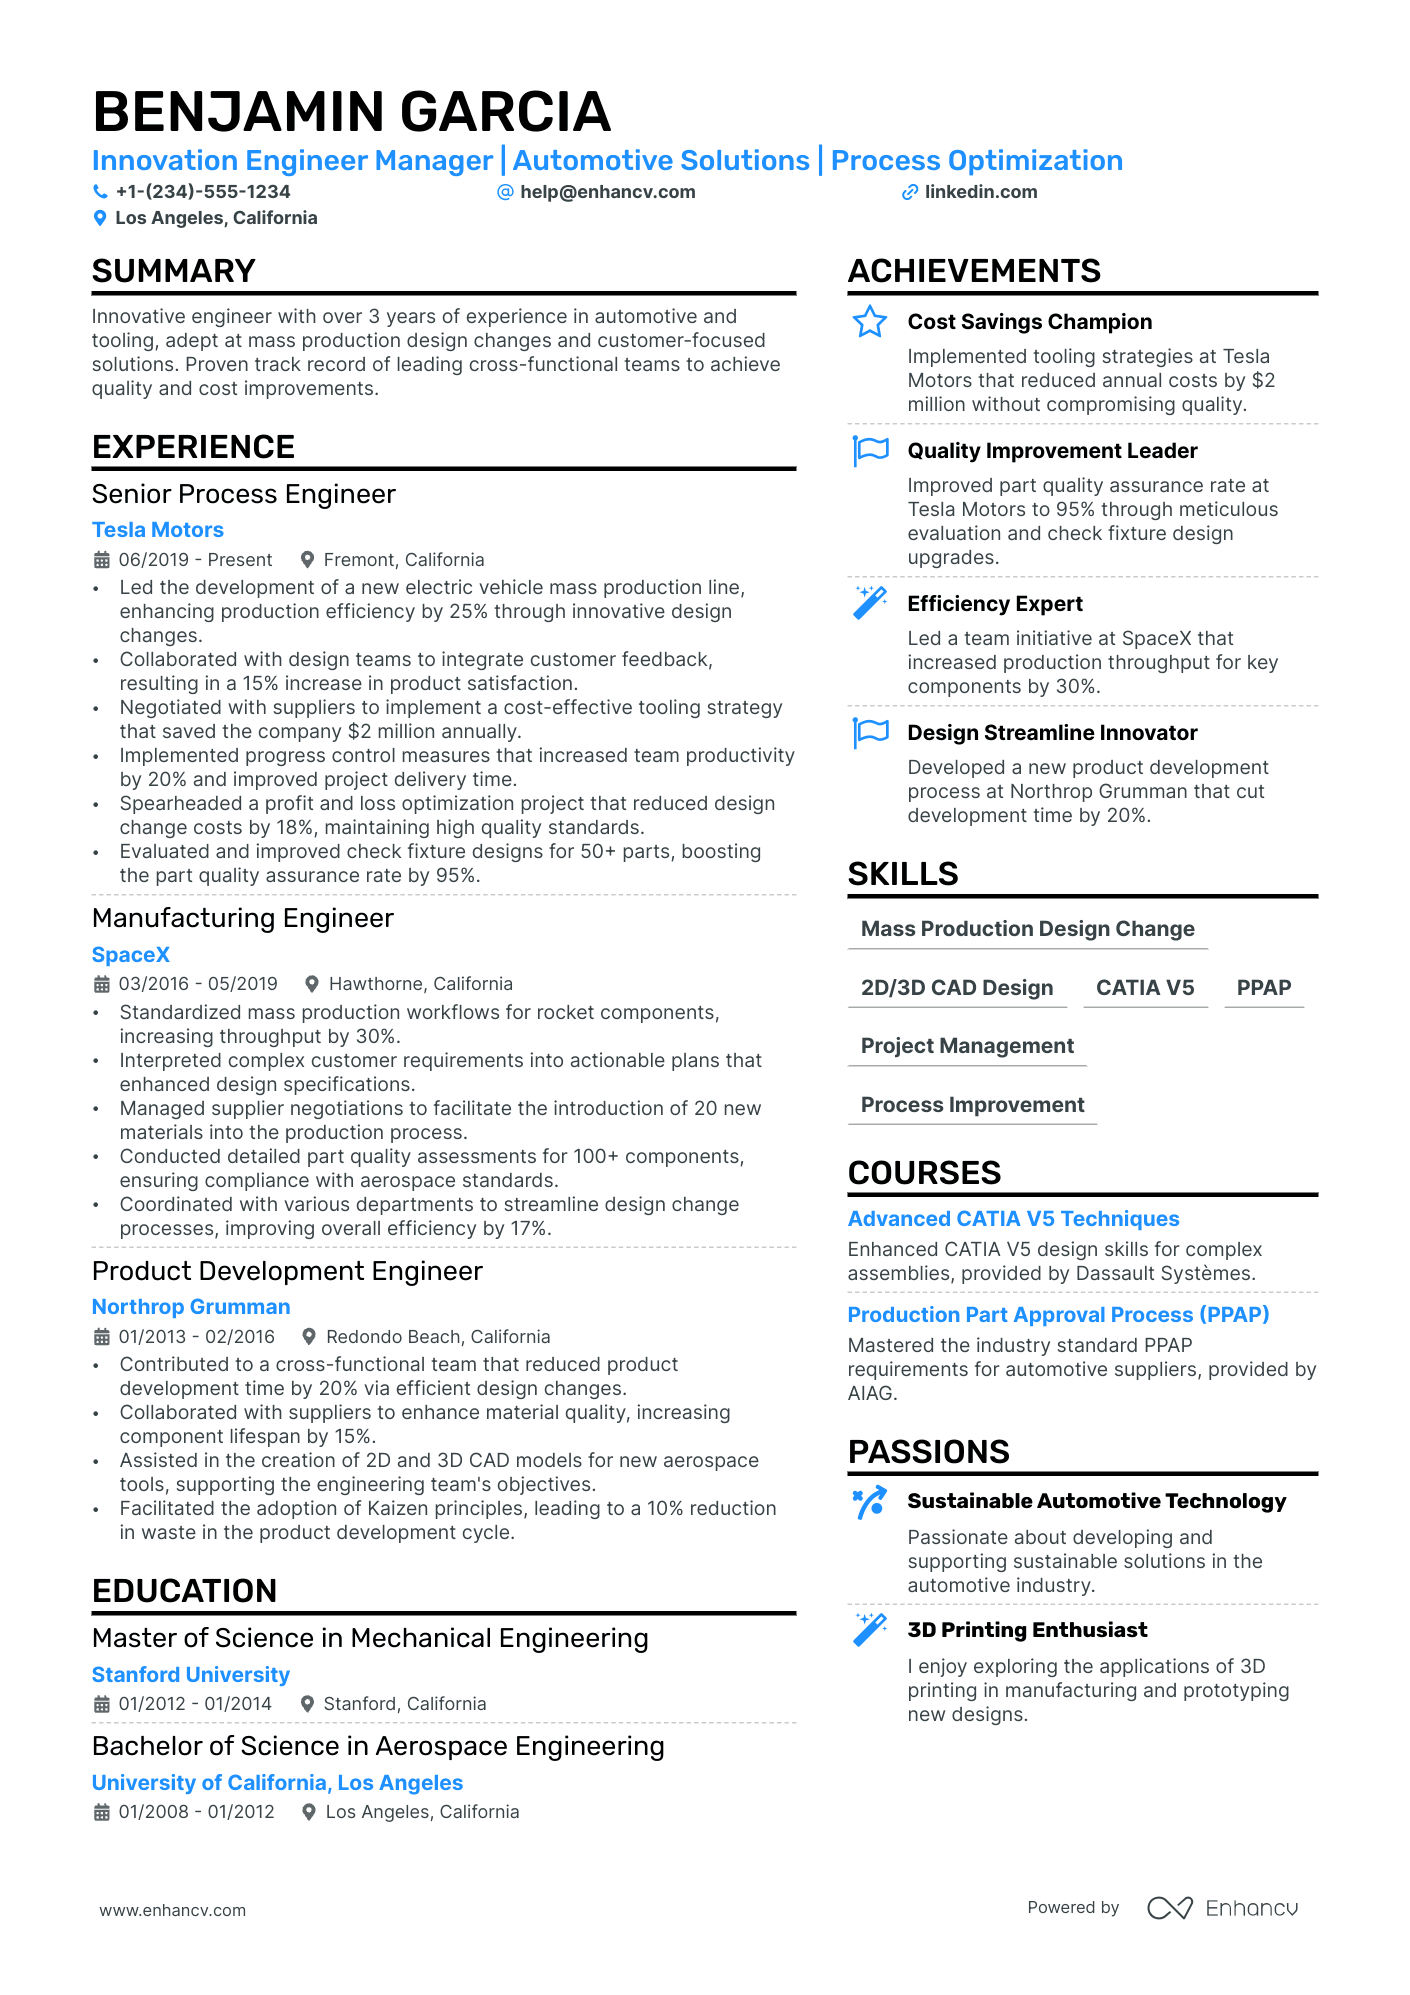 Innovation Manager resume example